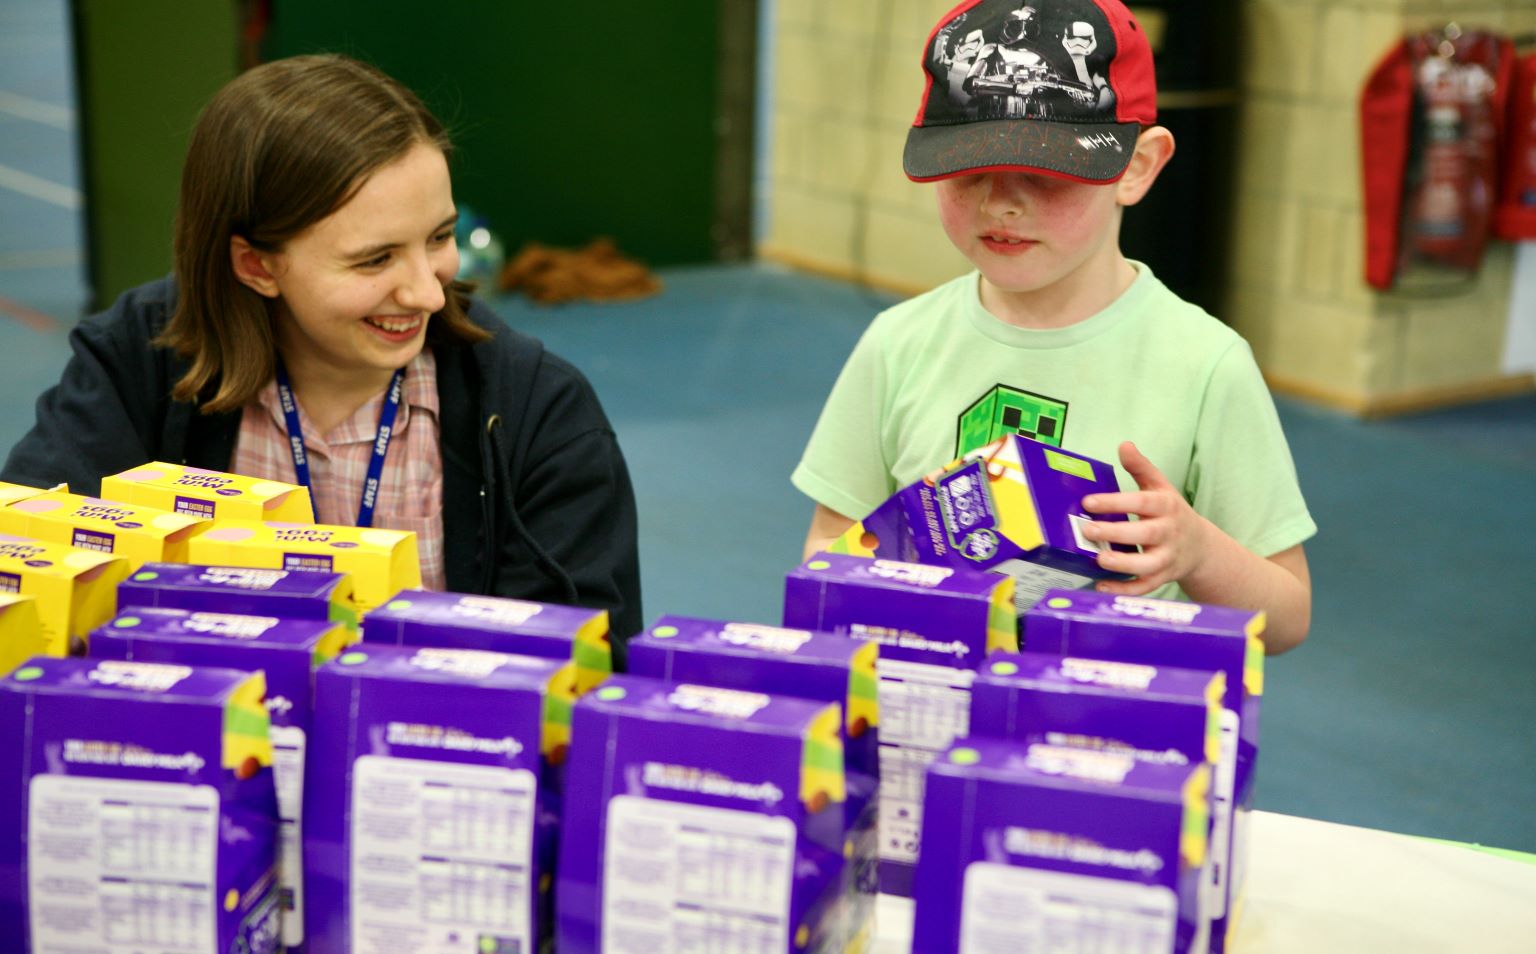 Alex from Families InFocus with a young boy, looking at a table of Easter eggs. The boy is wearing a cap.